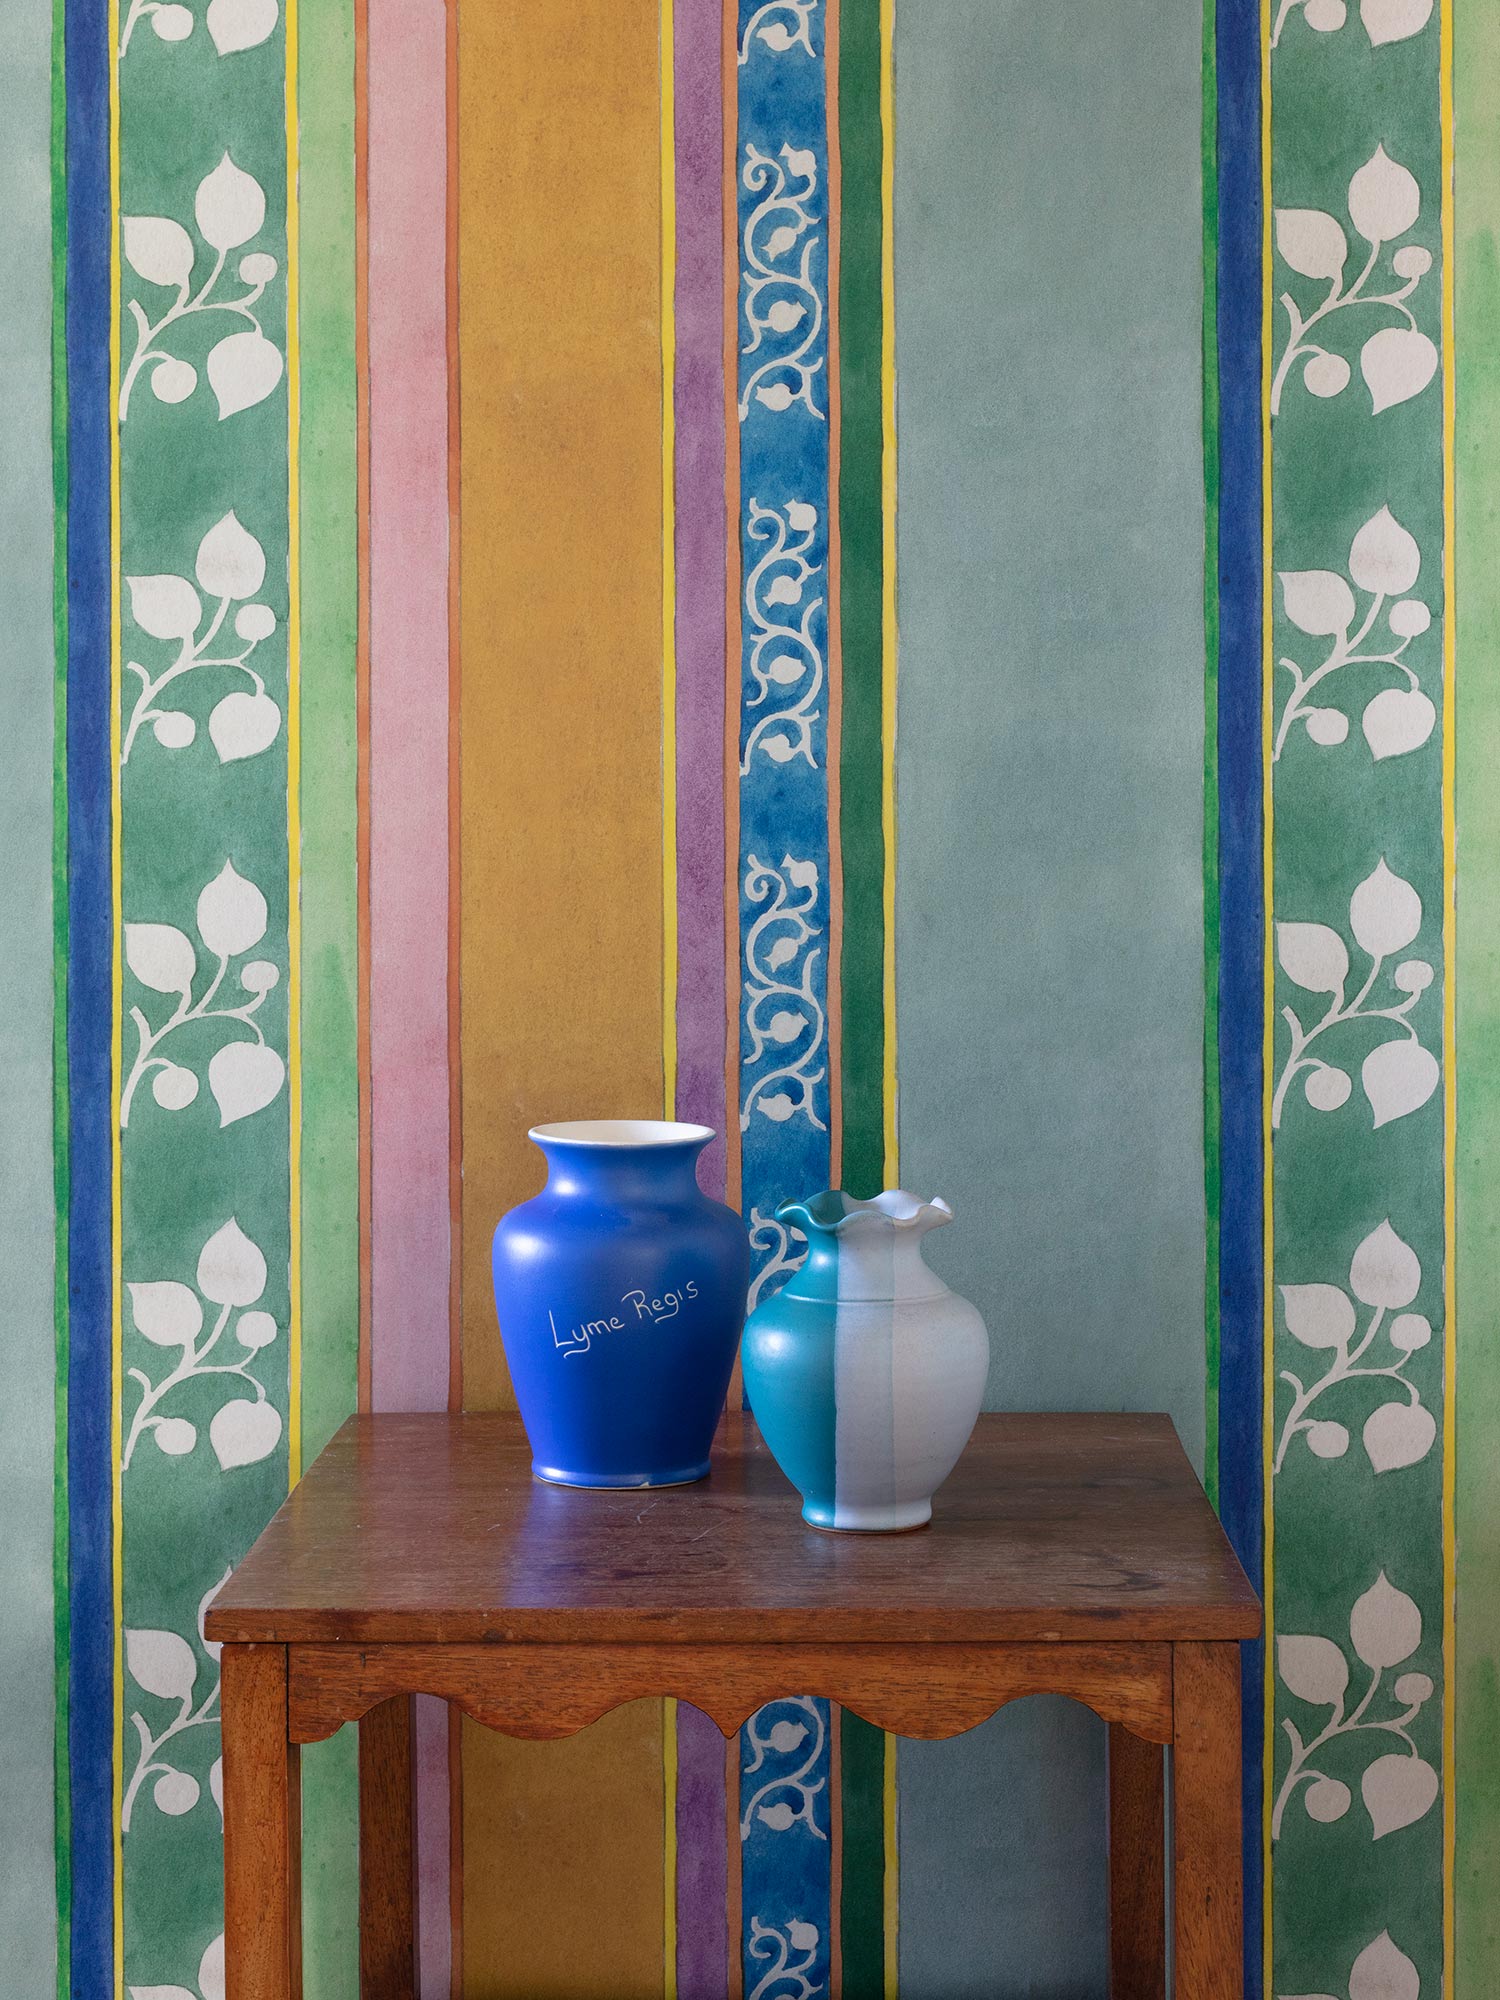 Striped green, pink, orange and blue wallpaper from 1918 by Arts & Crafts artist CFA Voysey, pictured with vases